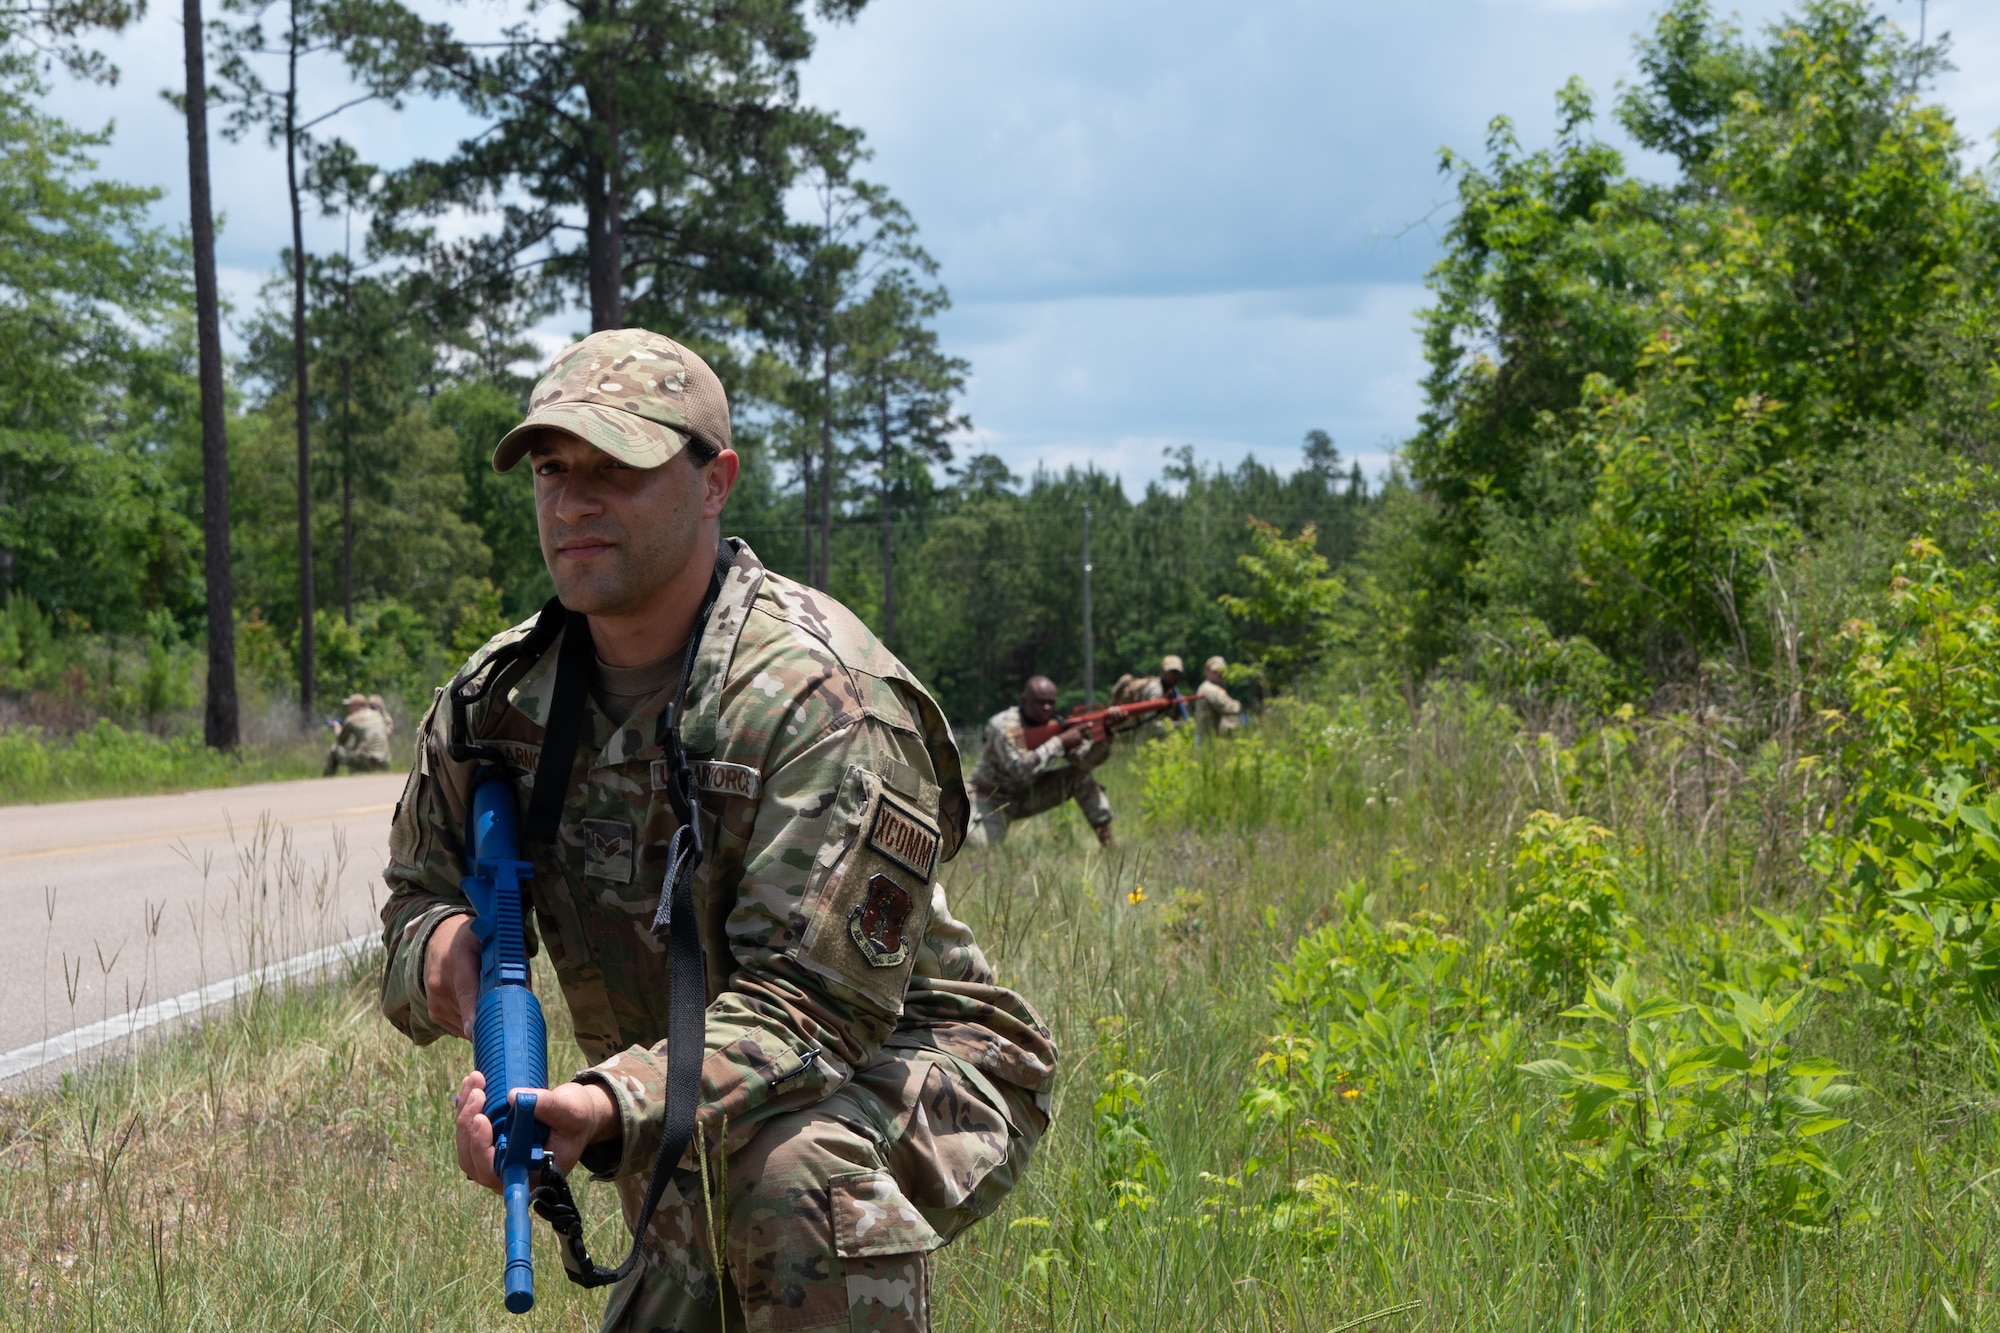 Senior Airman Joshua Arnold, 239th Combat Communications Squadron, keeps watch while on a patrol during Exercise BUMBU 22 at Camp Shelby, Mississippi, June 7, 2022. BUMBU 22 is a training exercise involving five geographically-separated combat communications squadrons from across the 254th Combat Communications Group. (U.S. Air National Guard photo by Staff Sgt. Adrian Brakeley)